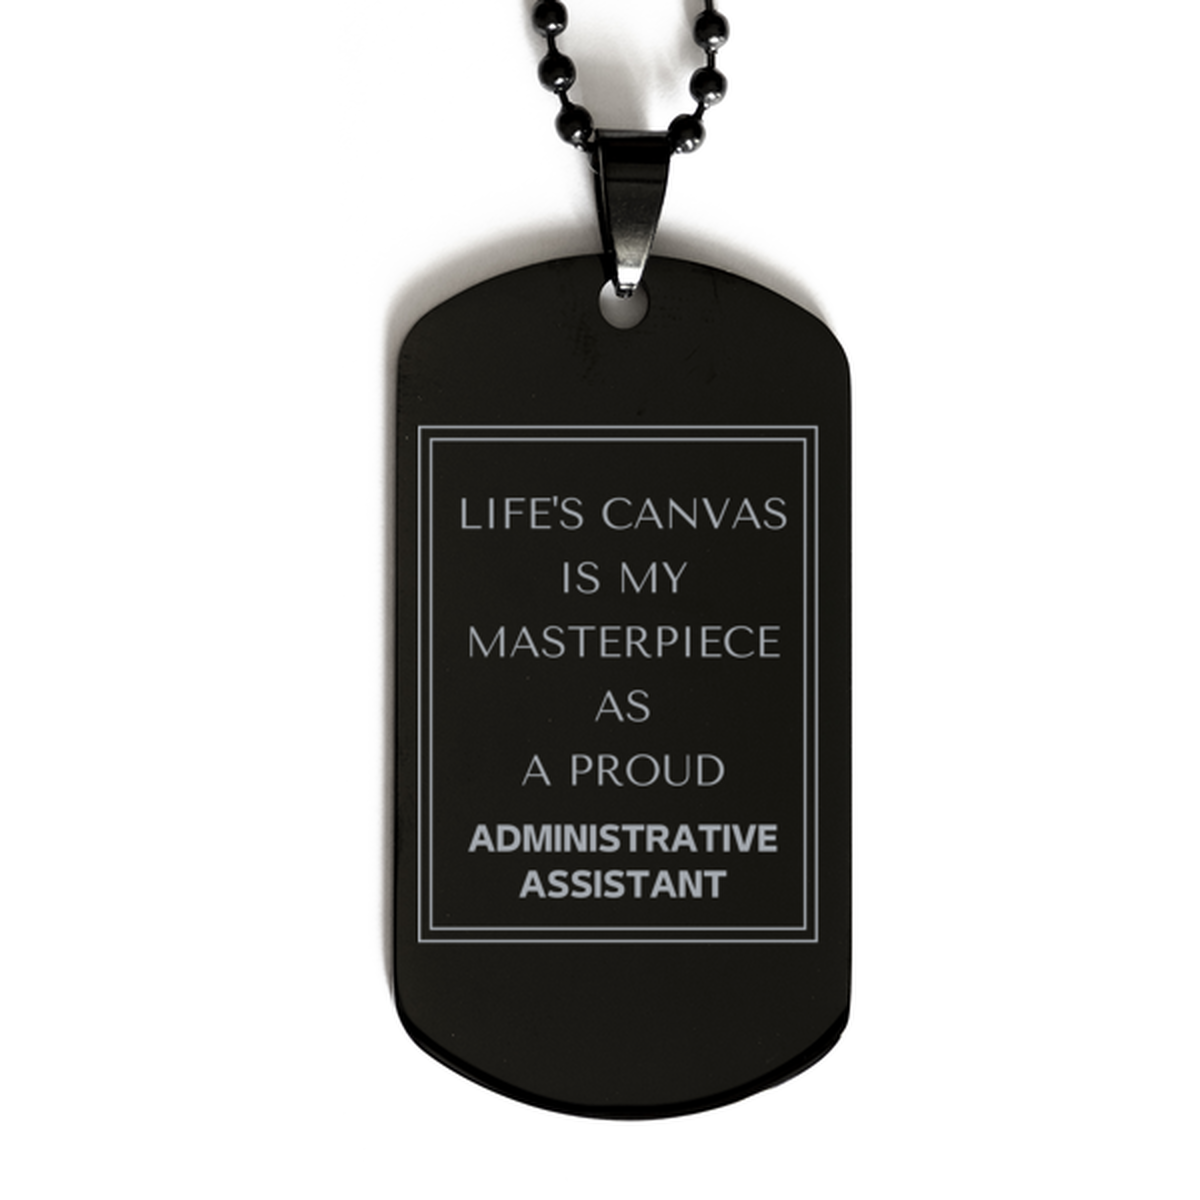 Proud Administrative Assistant Gifts, Life's canvas is my masterpiece, Epic Birthday Christmas Unique Black Dog Tag For Administrative Assistant, Coworkers, Men, Women, Friends